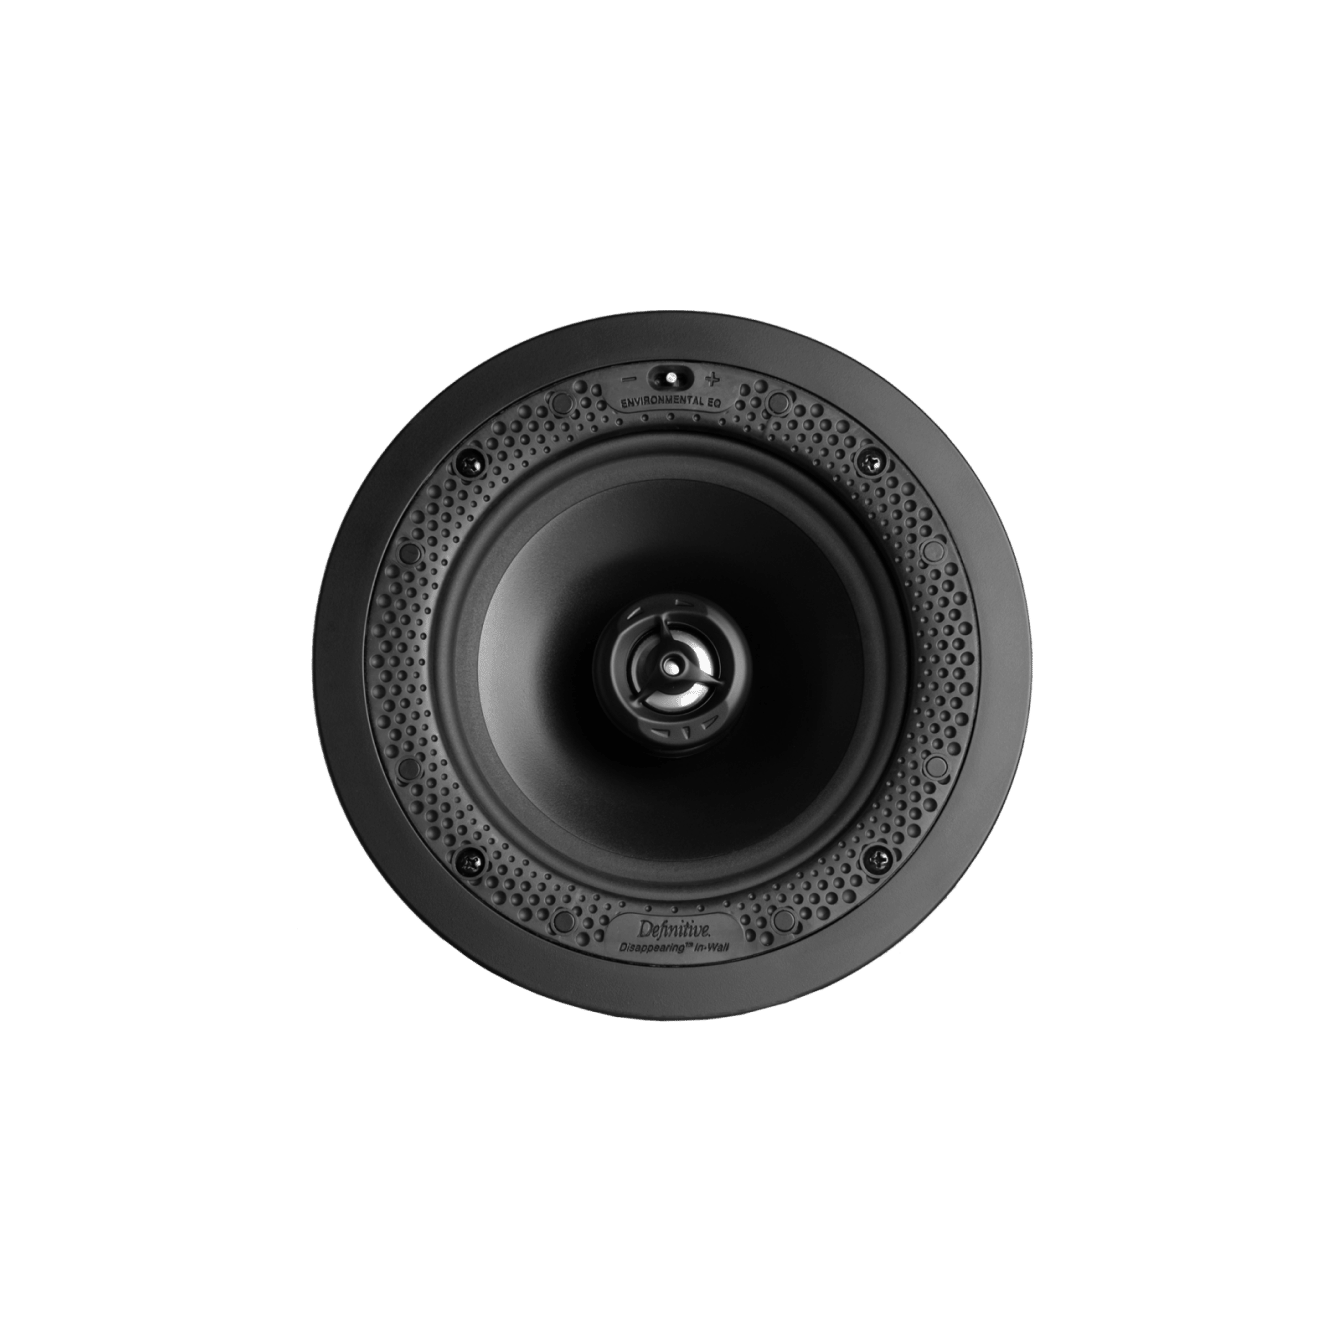 Definitive Technology DI 6.5R Disappearing Series Round In-Wall Speaker